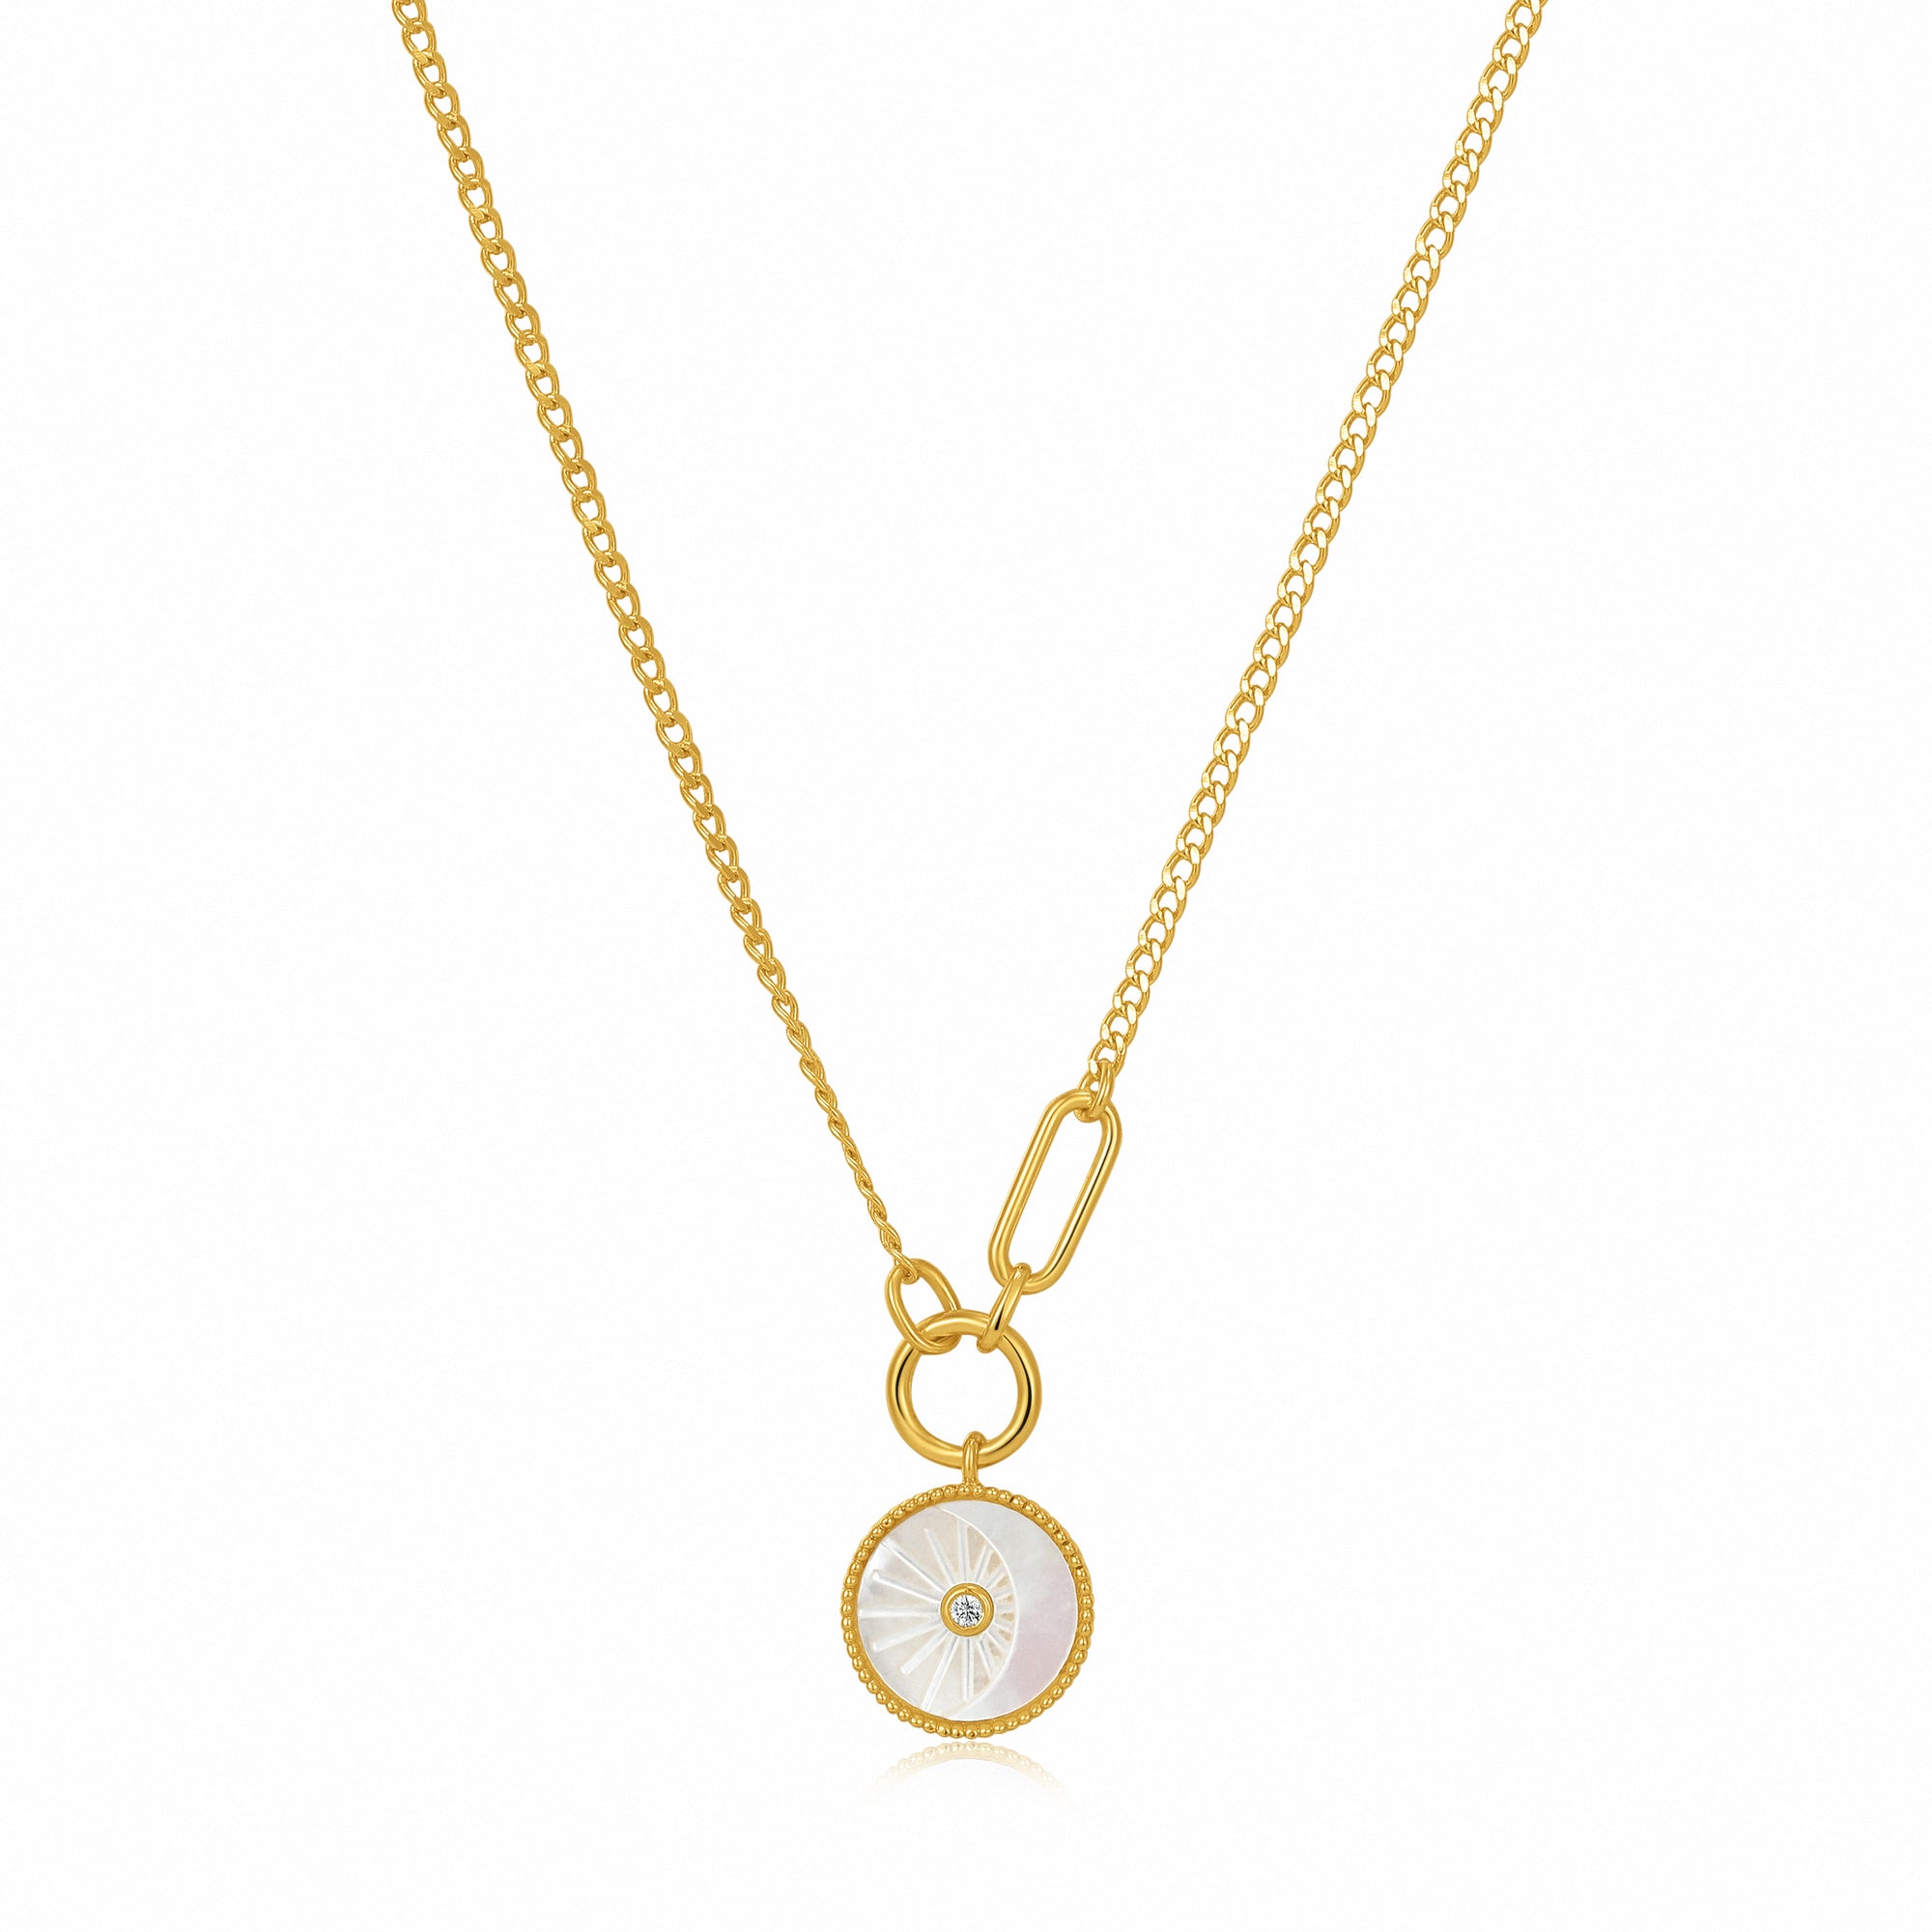 ANIA HAIE ANIA HAIE - Eclipse Emblem Gold Necklace available at The Good Life Boutique